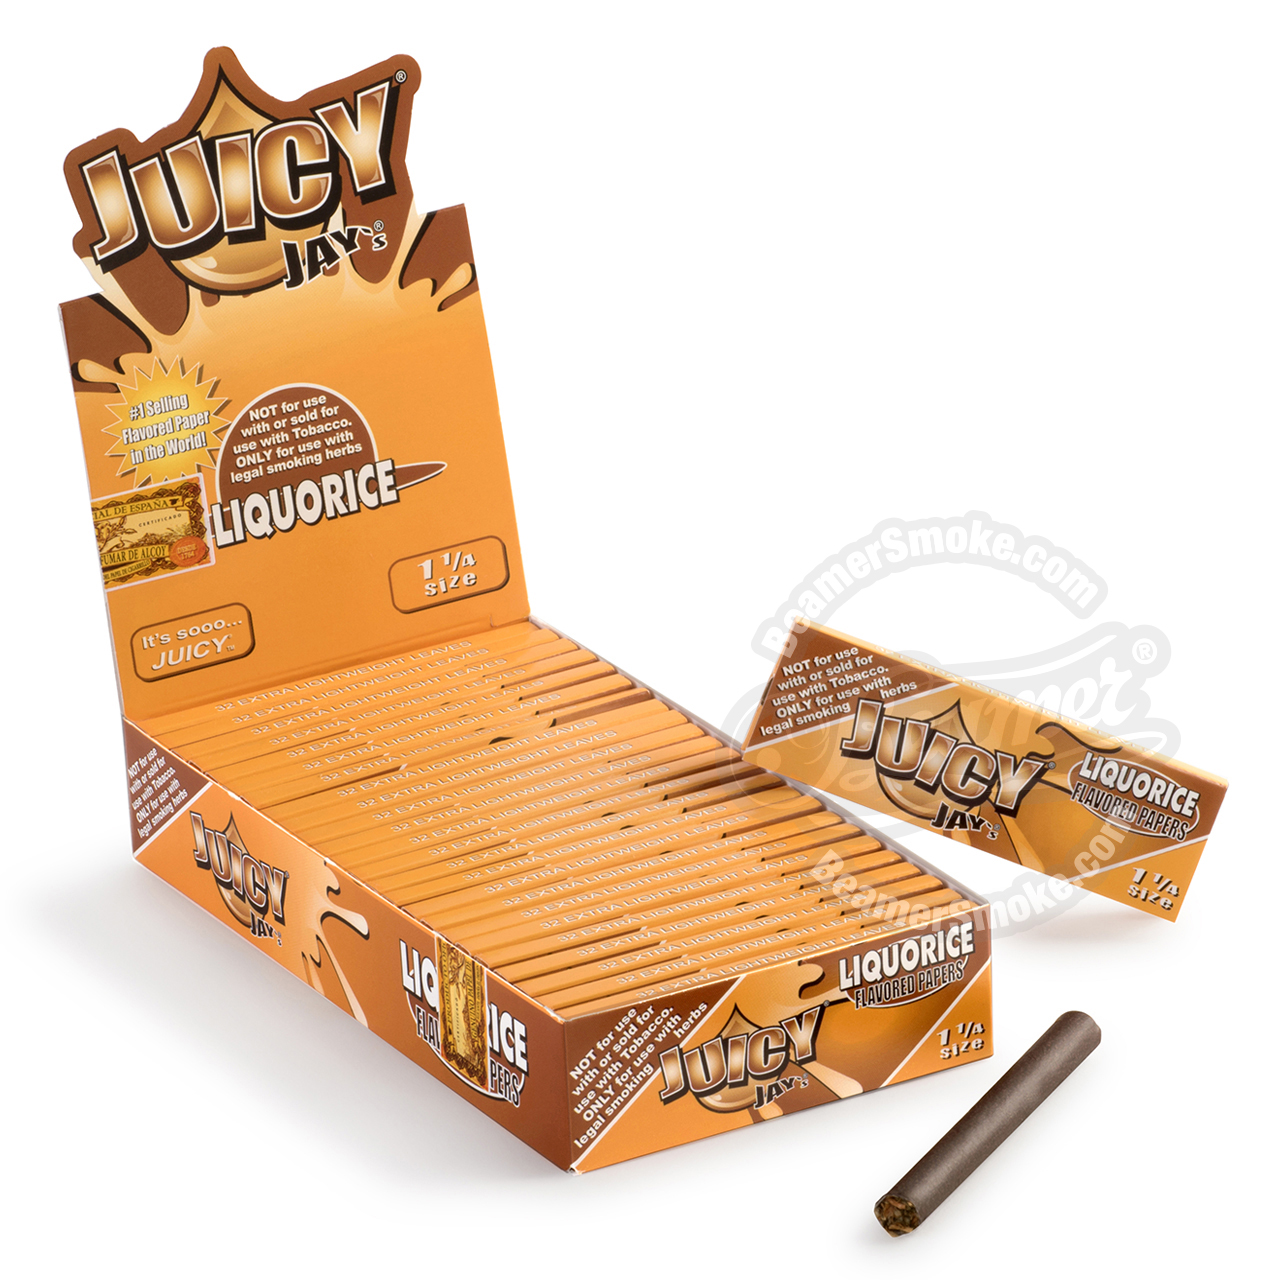 Juicy Jay’s Liquorice Flavor 1 1/4 Size Rolling Papers